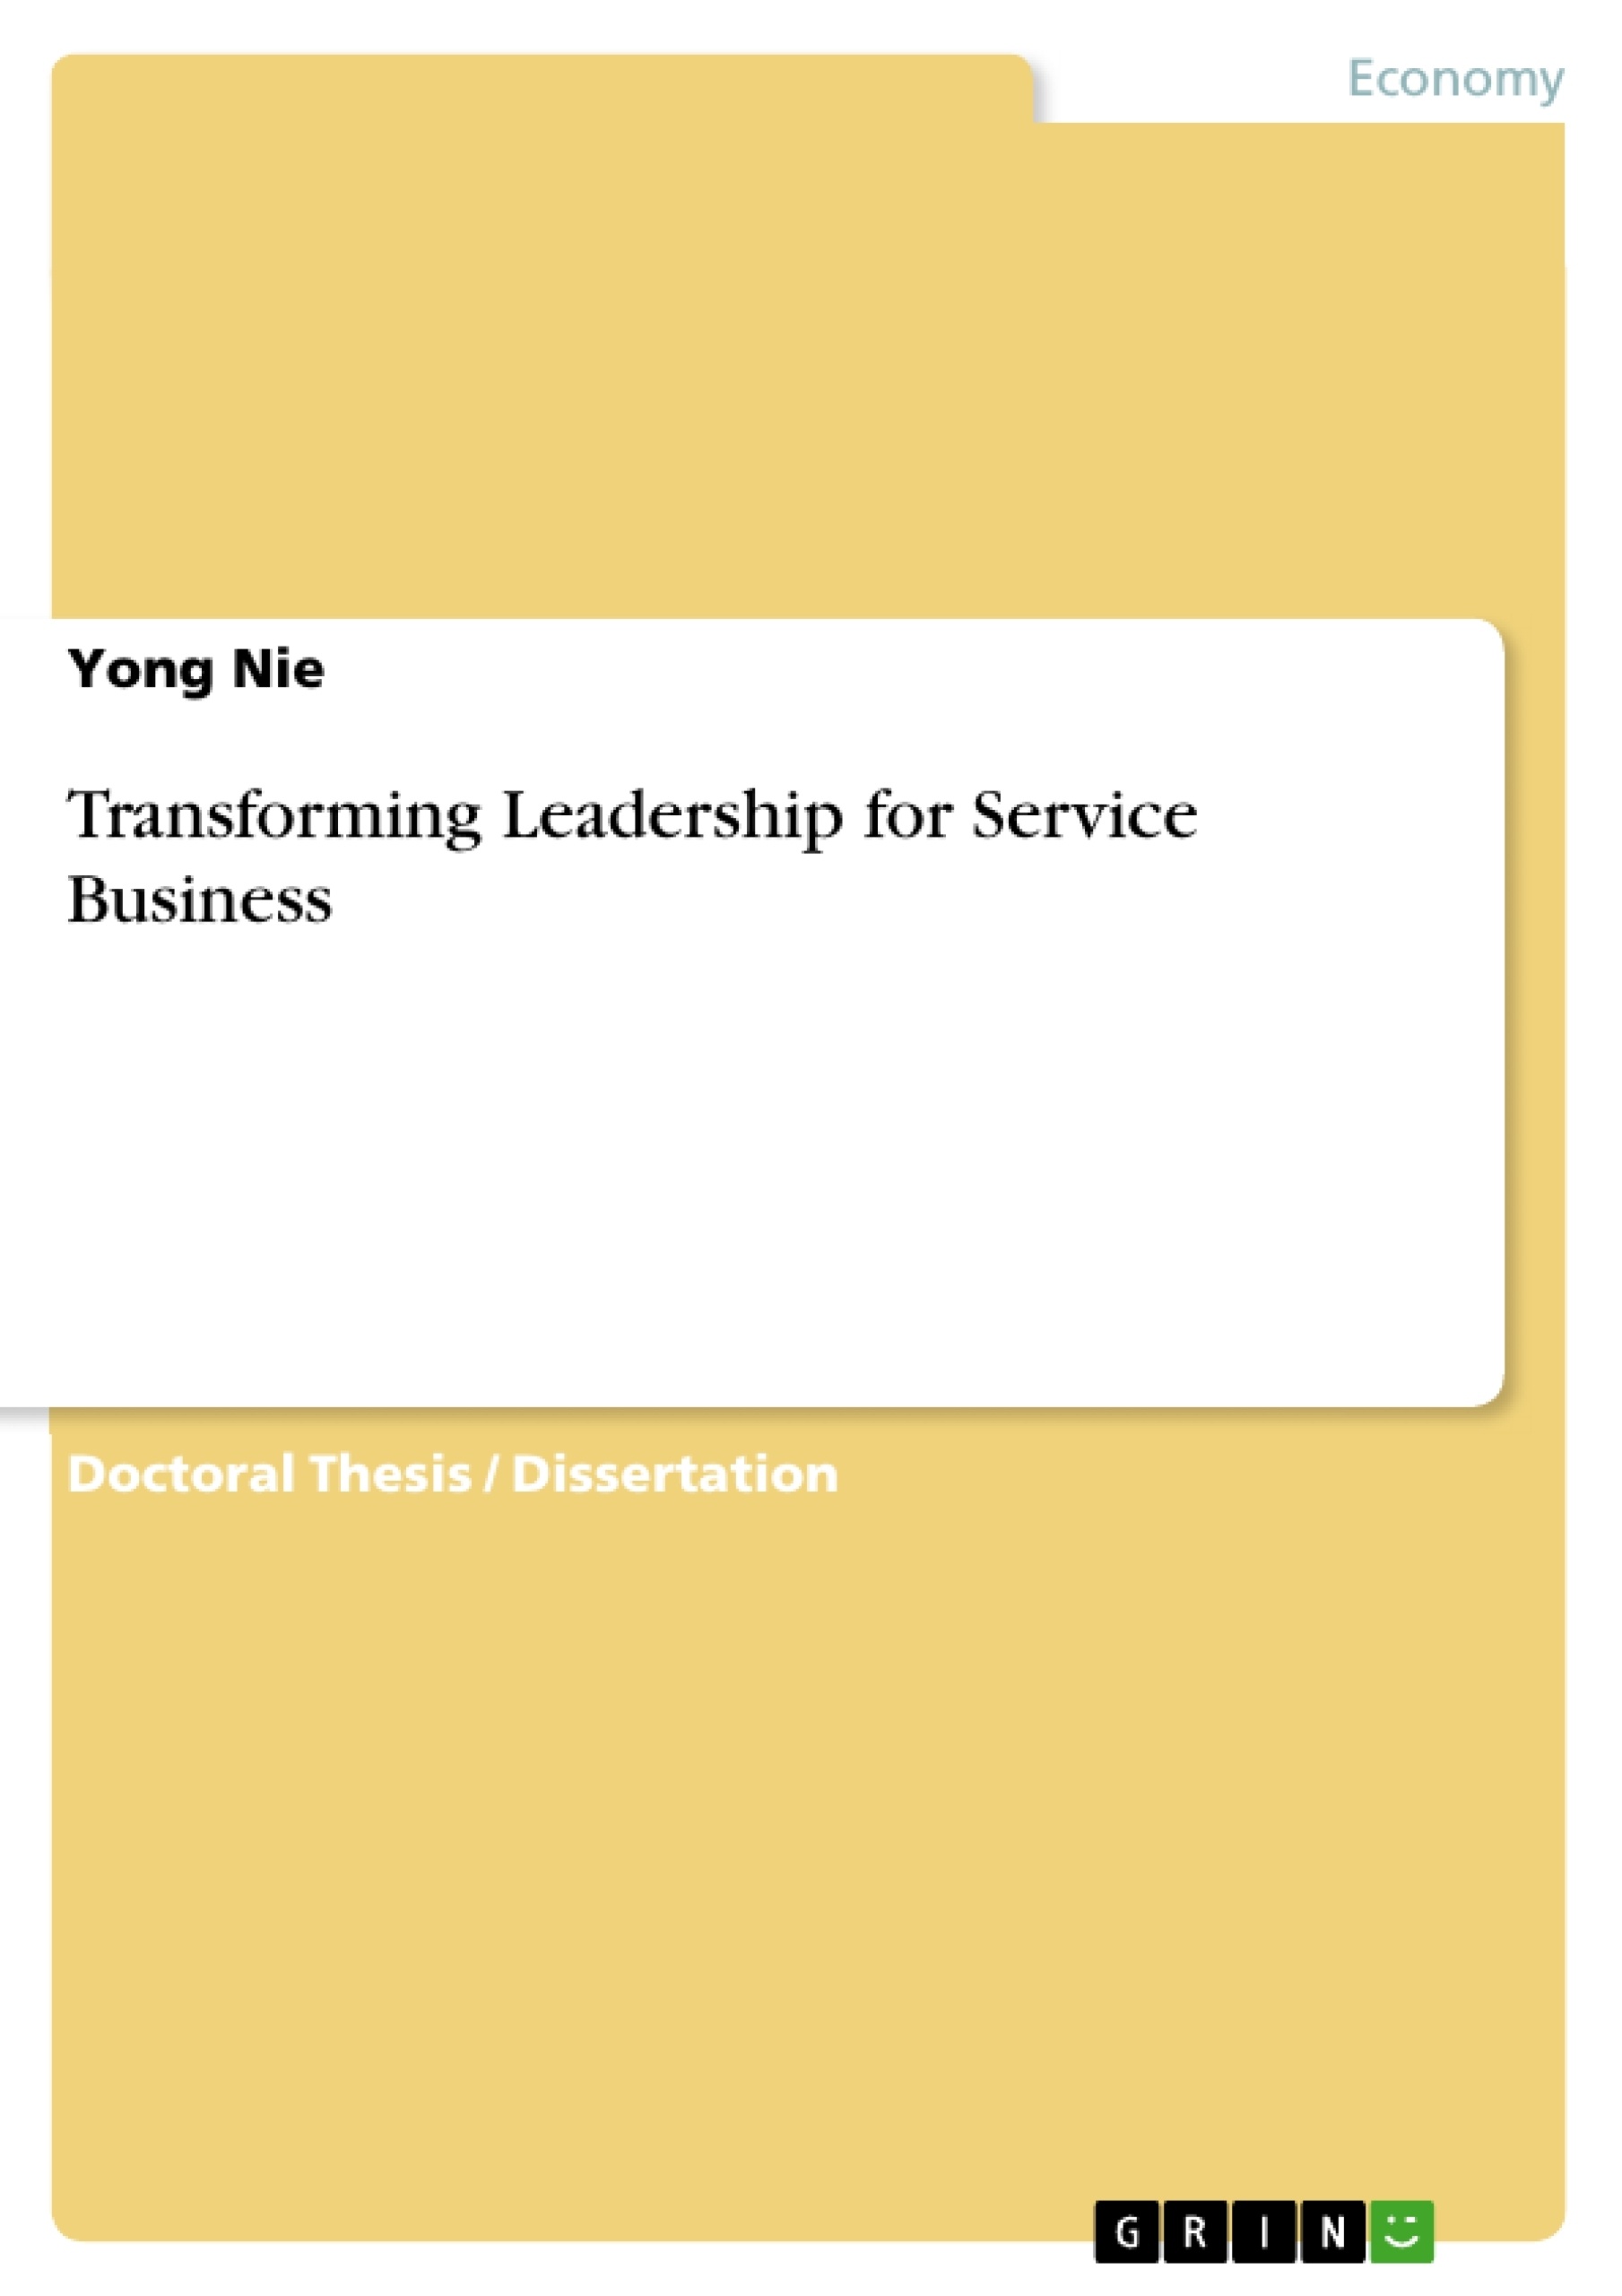 Title: Transforming Leadership for Service Business